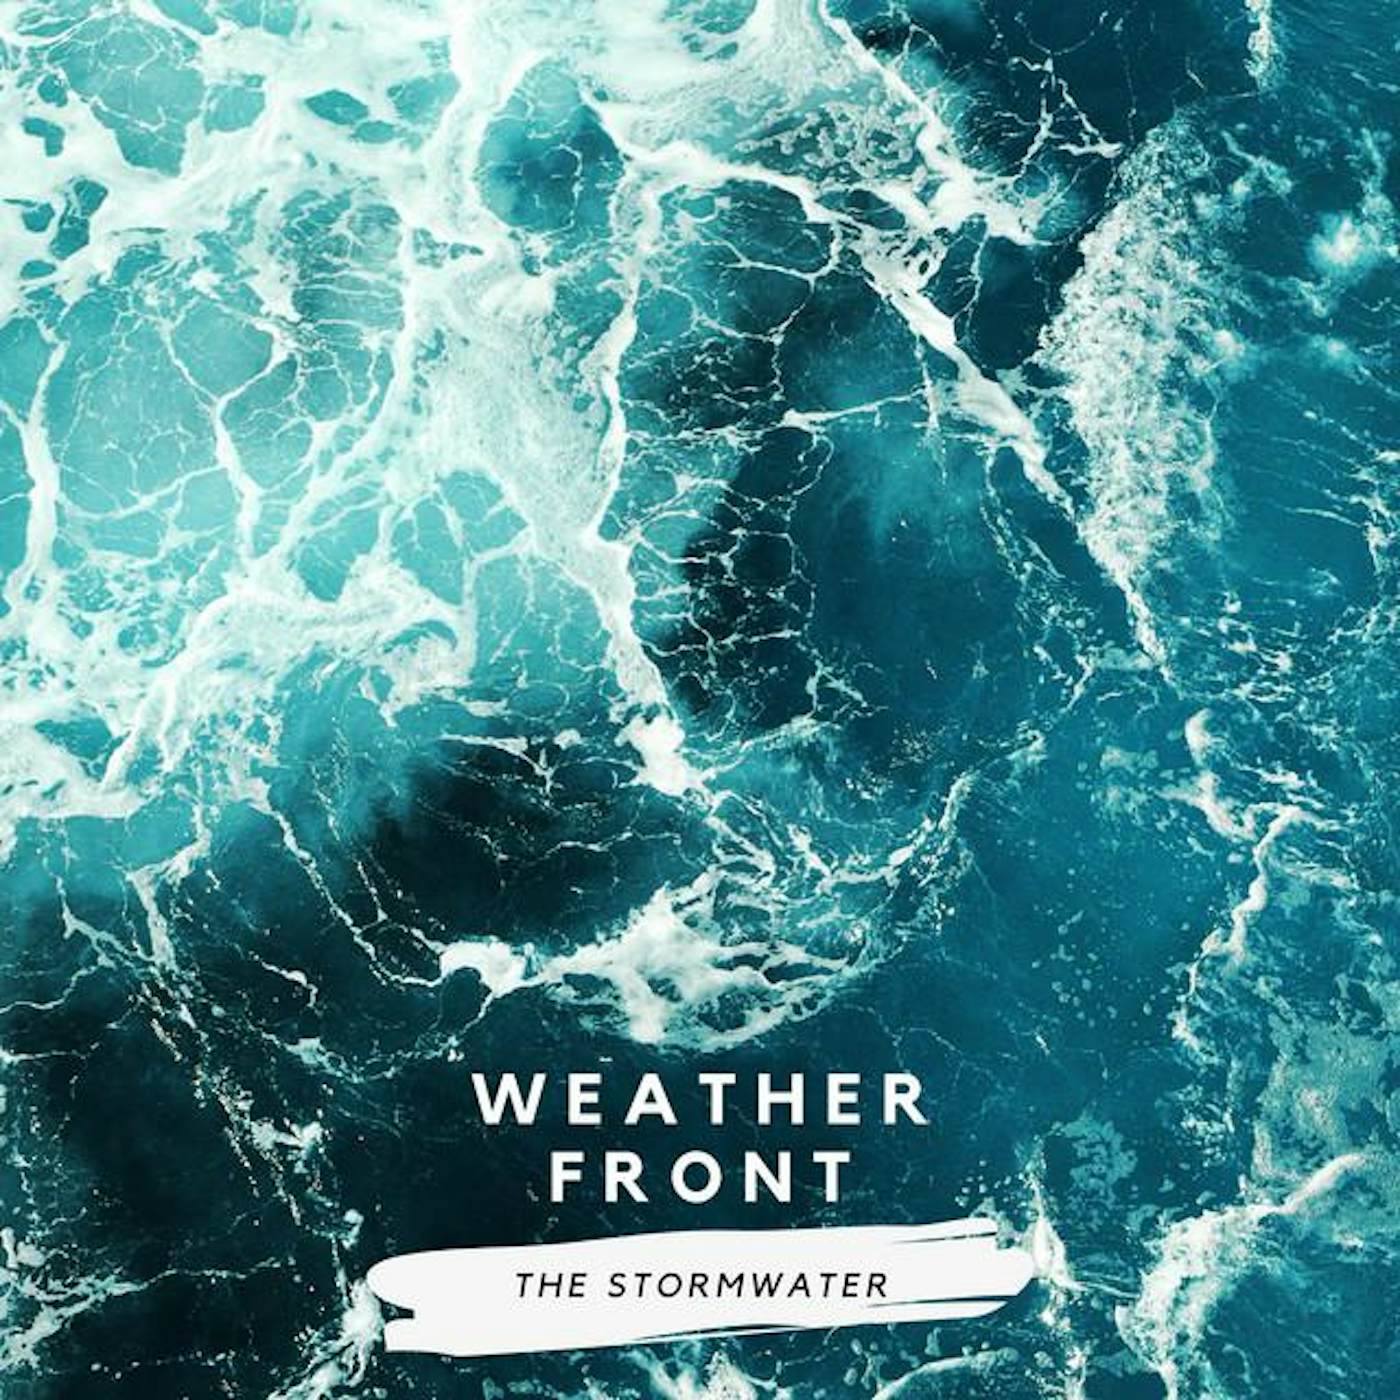 The Stormwater